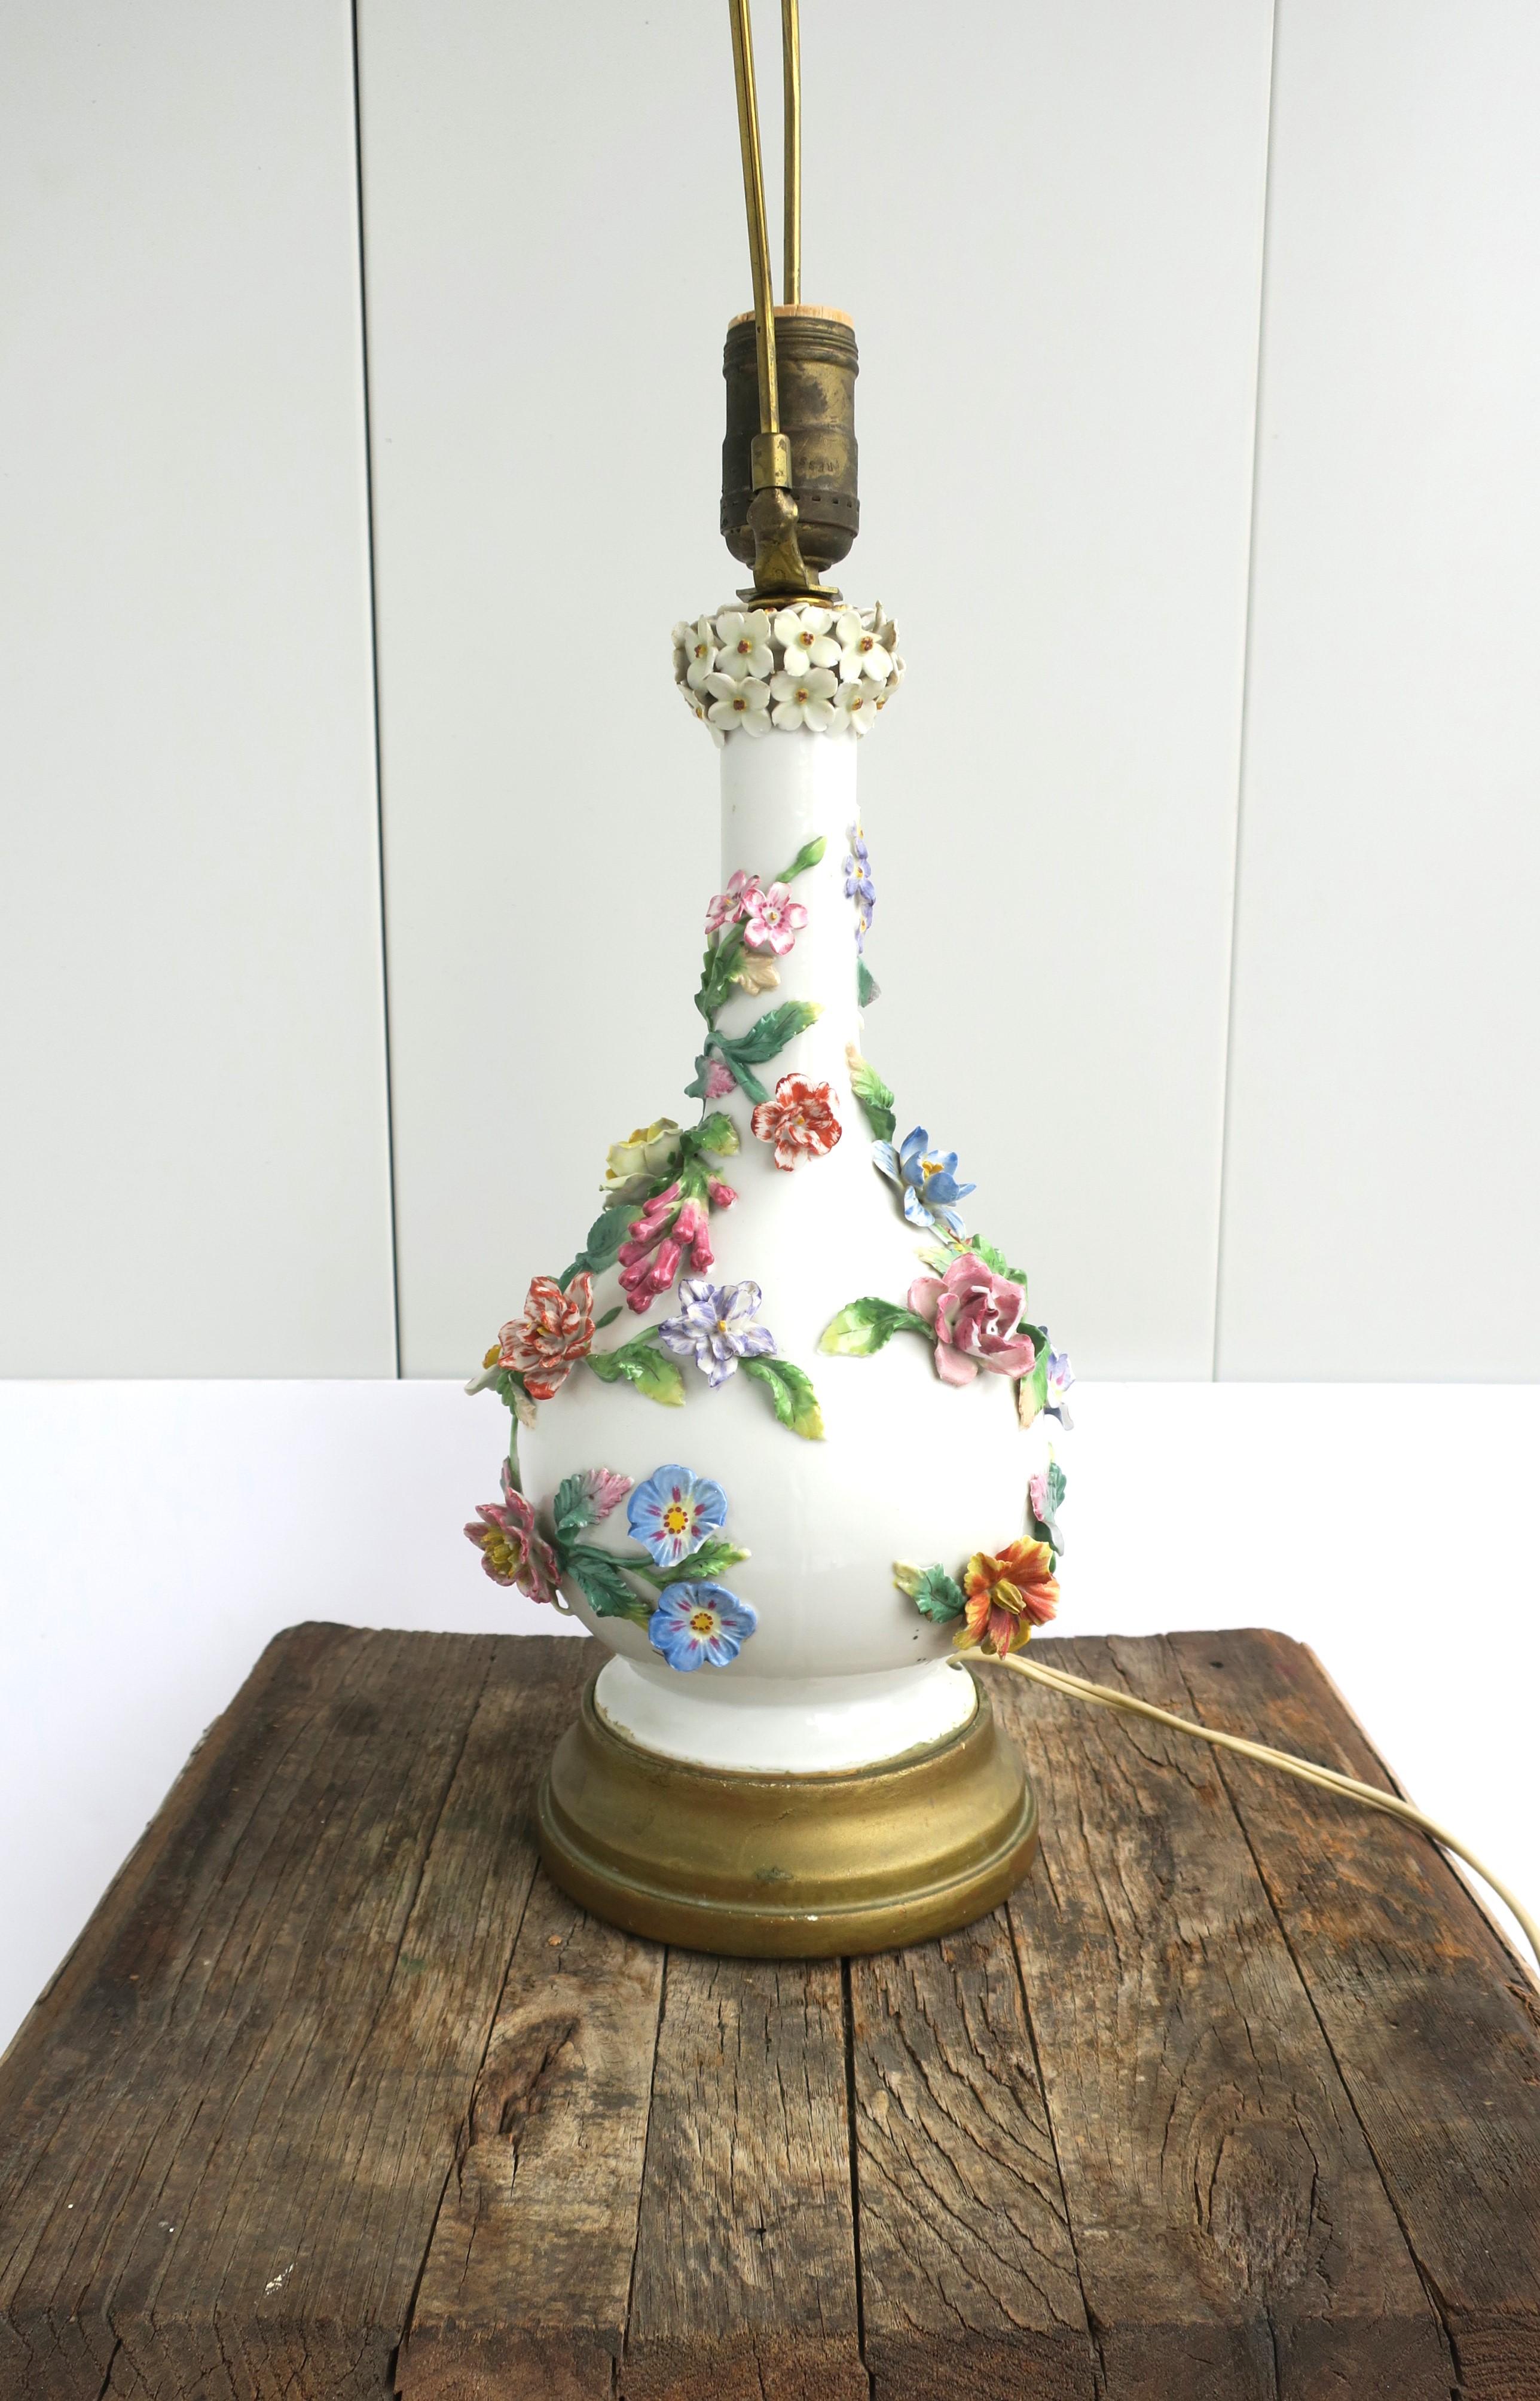 Italian White Porcelain Lamp with Colorful Flowers, Leaves & Vines Capo di Monte For Sale 9